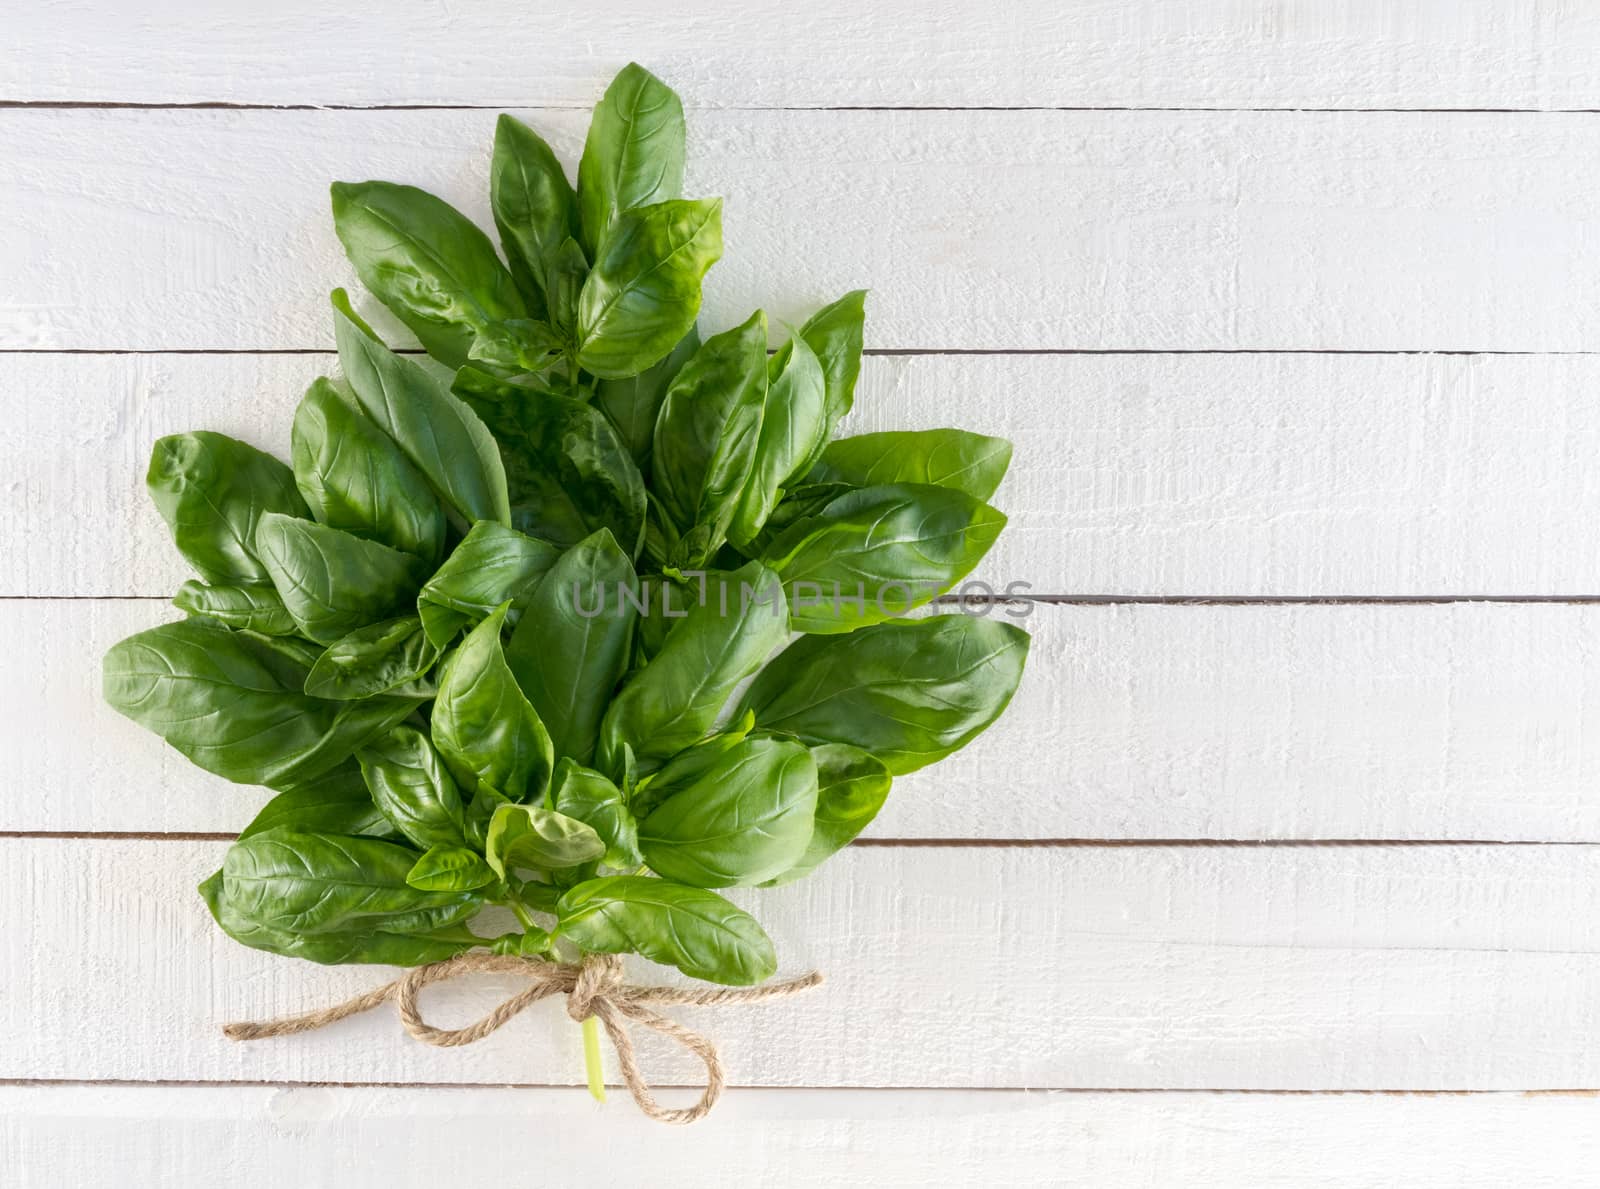 Fresh basil bouquet tied with twine on rustic wood background